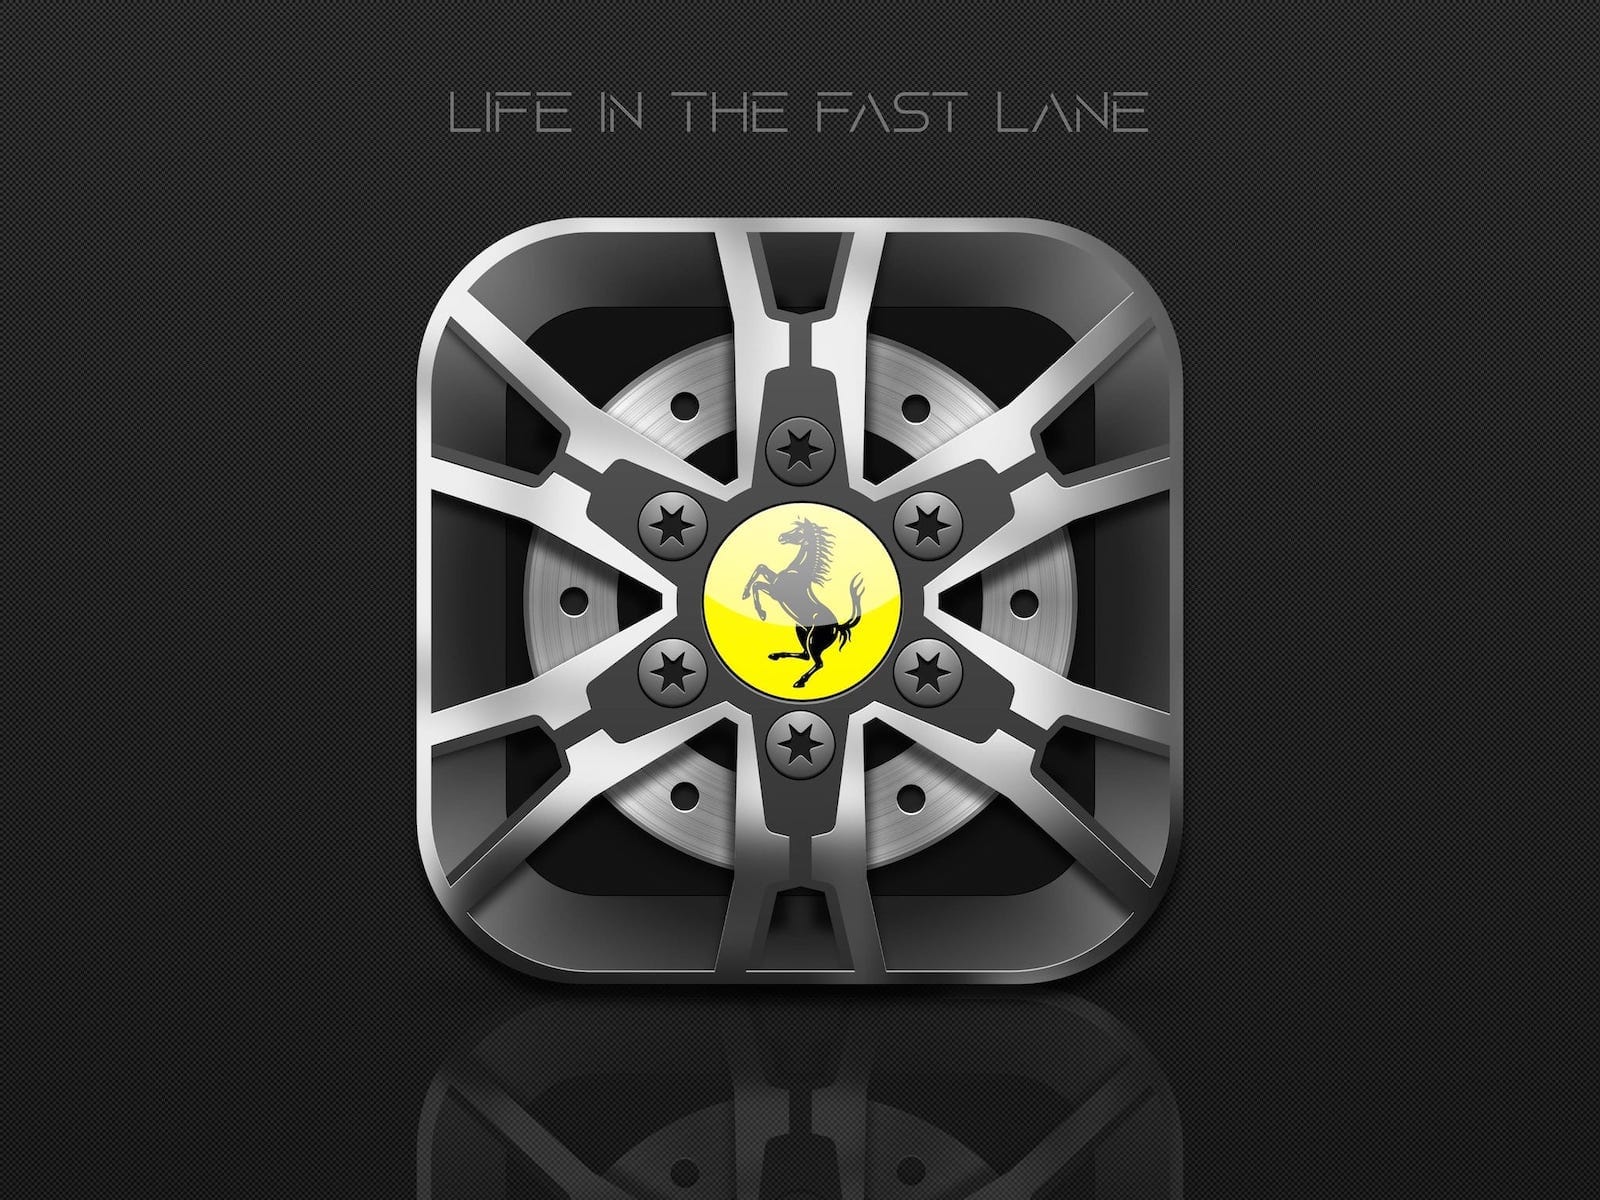 App icon in the form of a Ferrari rim with the words “Life in the fast lane” above it.